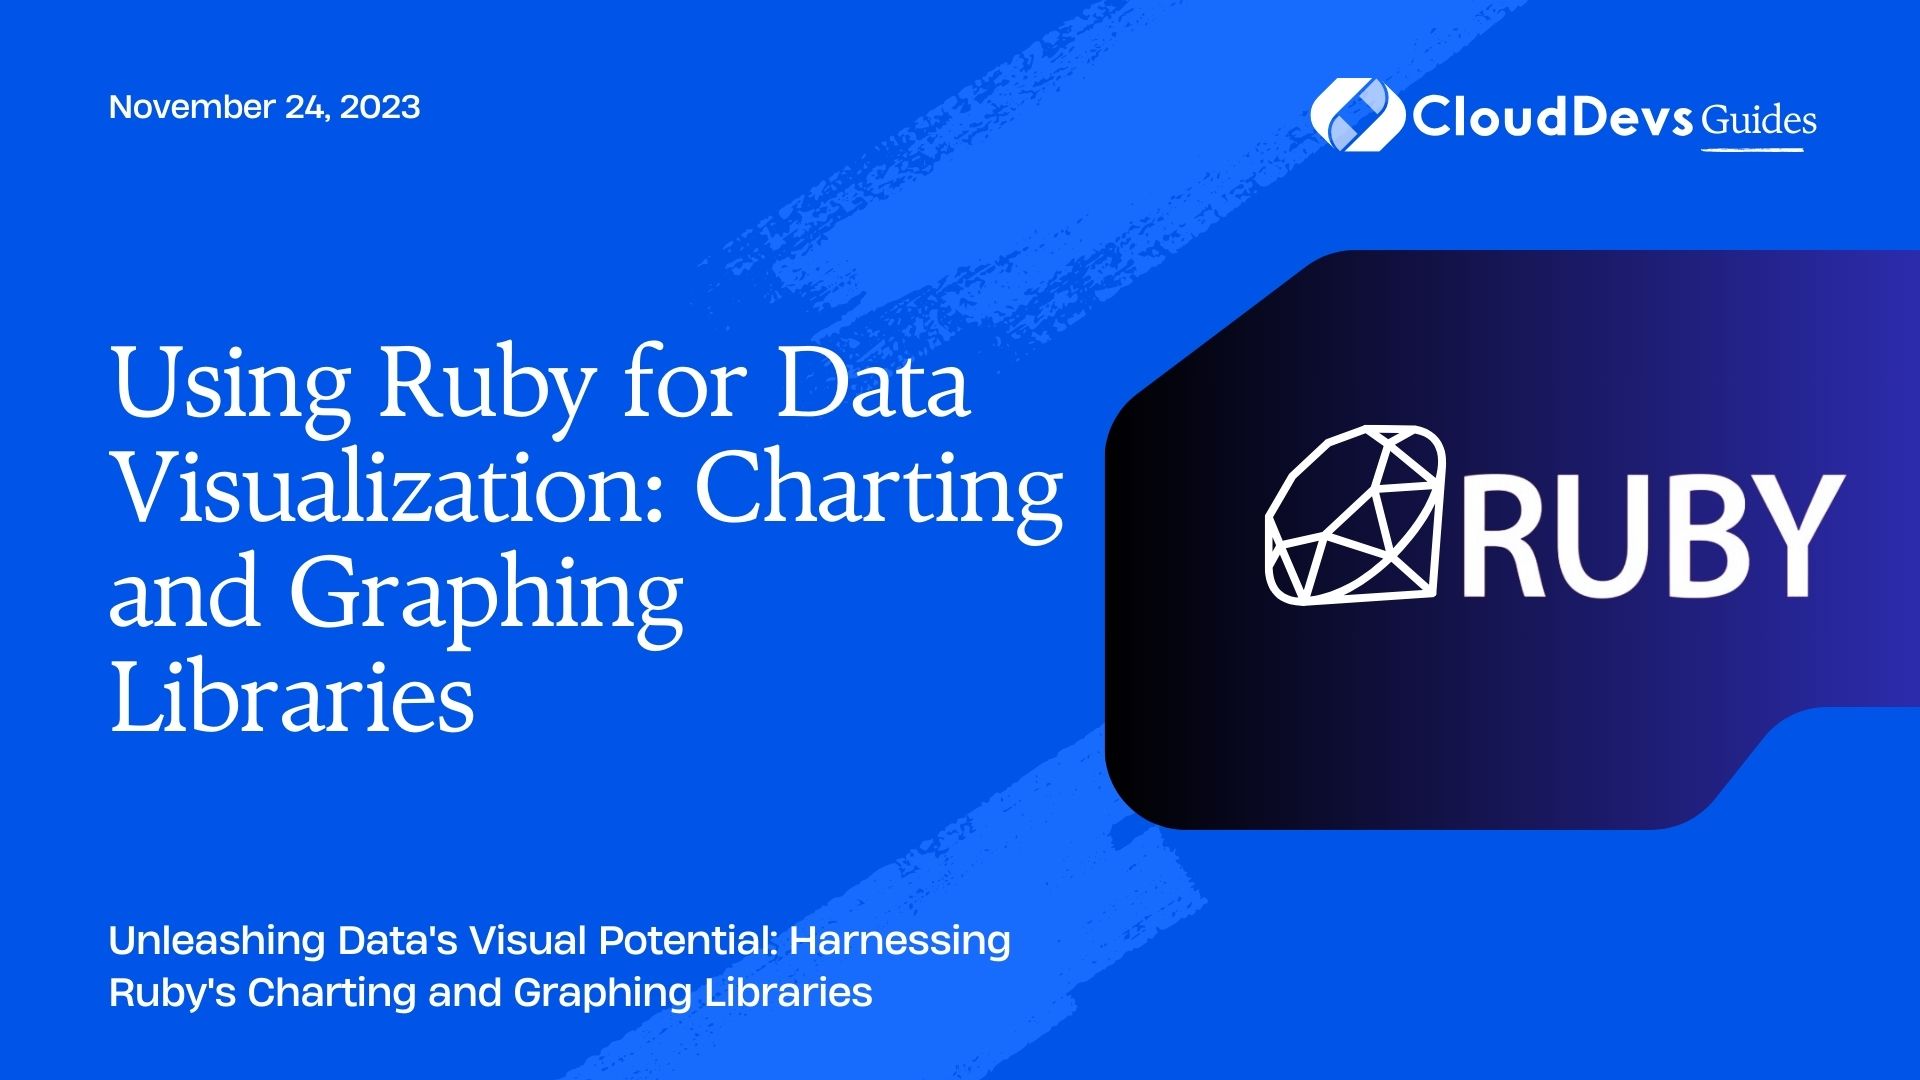 Using Ruby for Data Visualization: Charting and Graphing Libraries